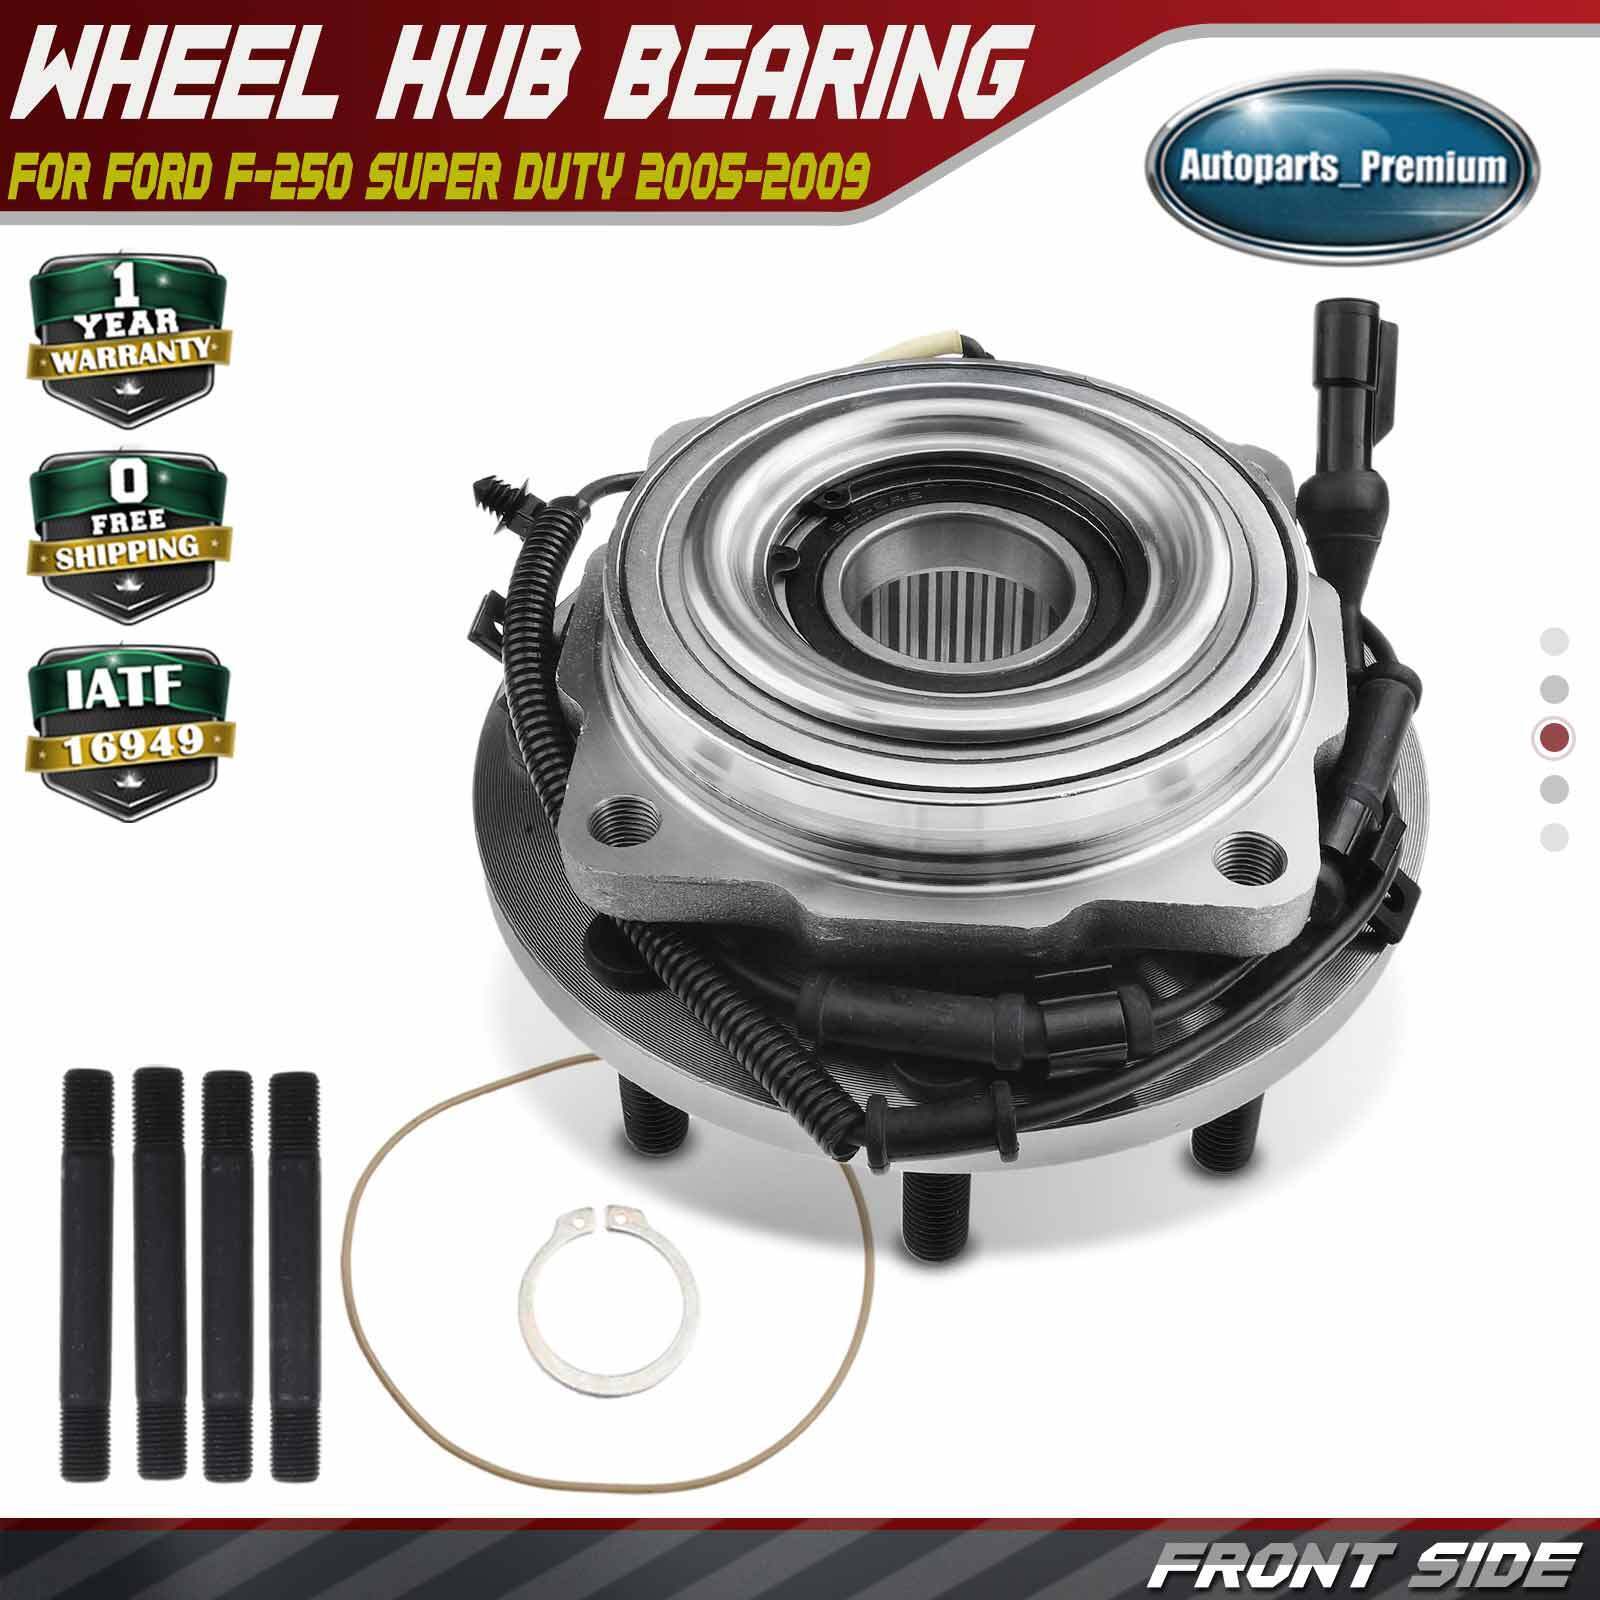 1x Front Wheel Hub Bearing Assembly for Ford F-250 Super Duty F-350 Super Duty